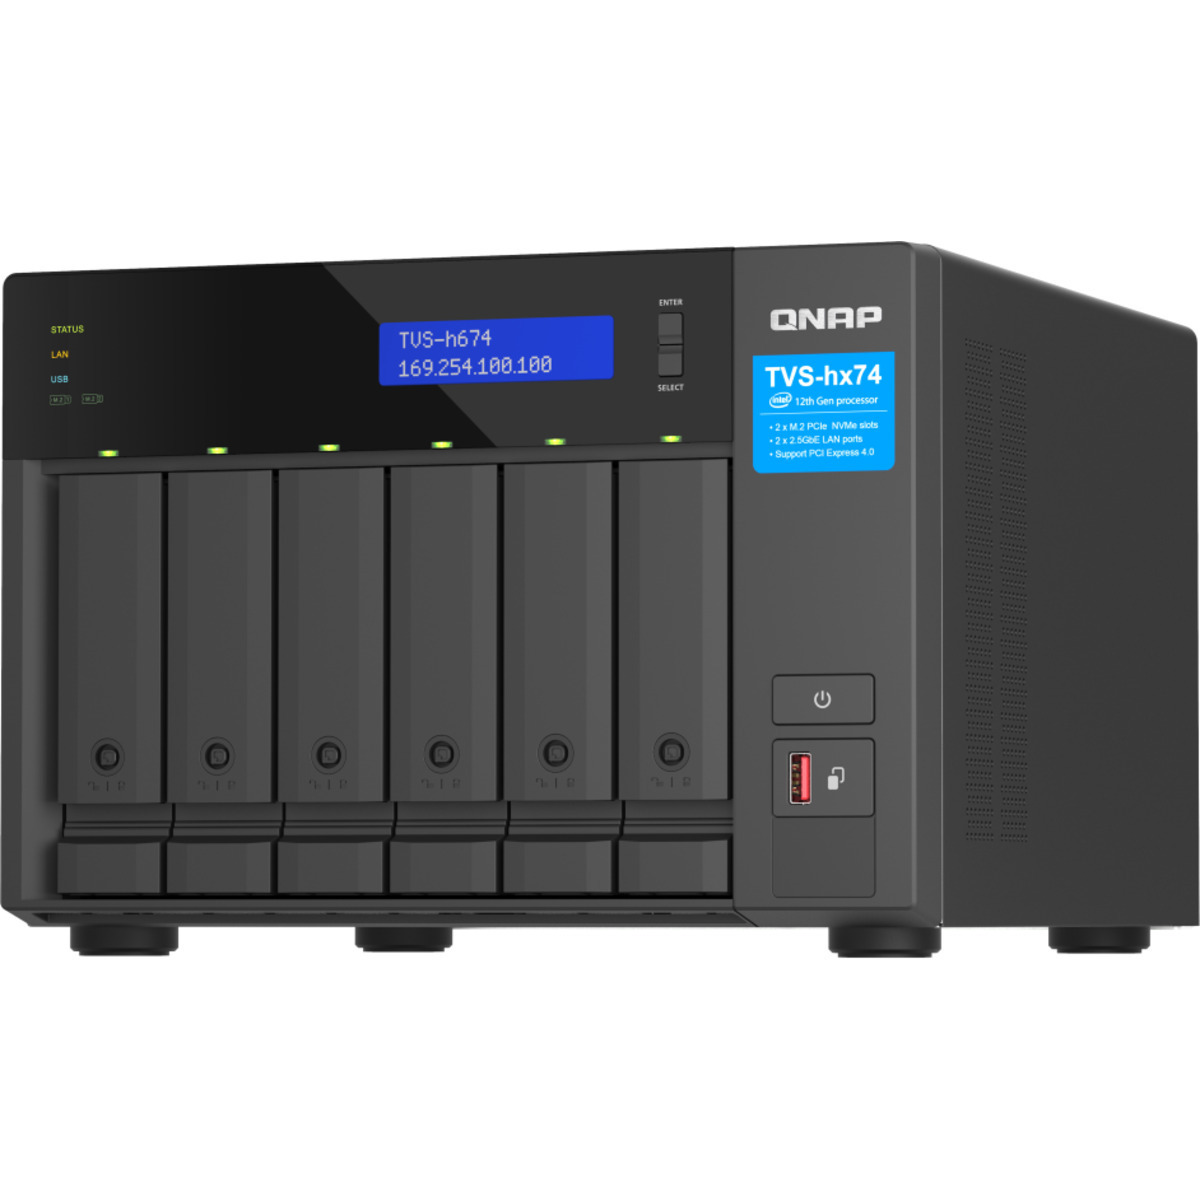 QNAP TVS-h674 Core i3 24tb 6-Bay Desktop Multimedia / Power User / Business NAS - Network Attached Storage Device 3x8tb Seagate BarraCuda ST8000DM004 3.5 5400rpm SATA 6Gb/s HDD CONSUMER Class Drives Installed - Burn-In Tested TVS-h674 Core i3